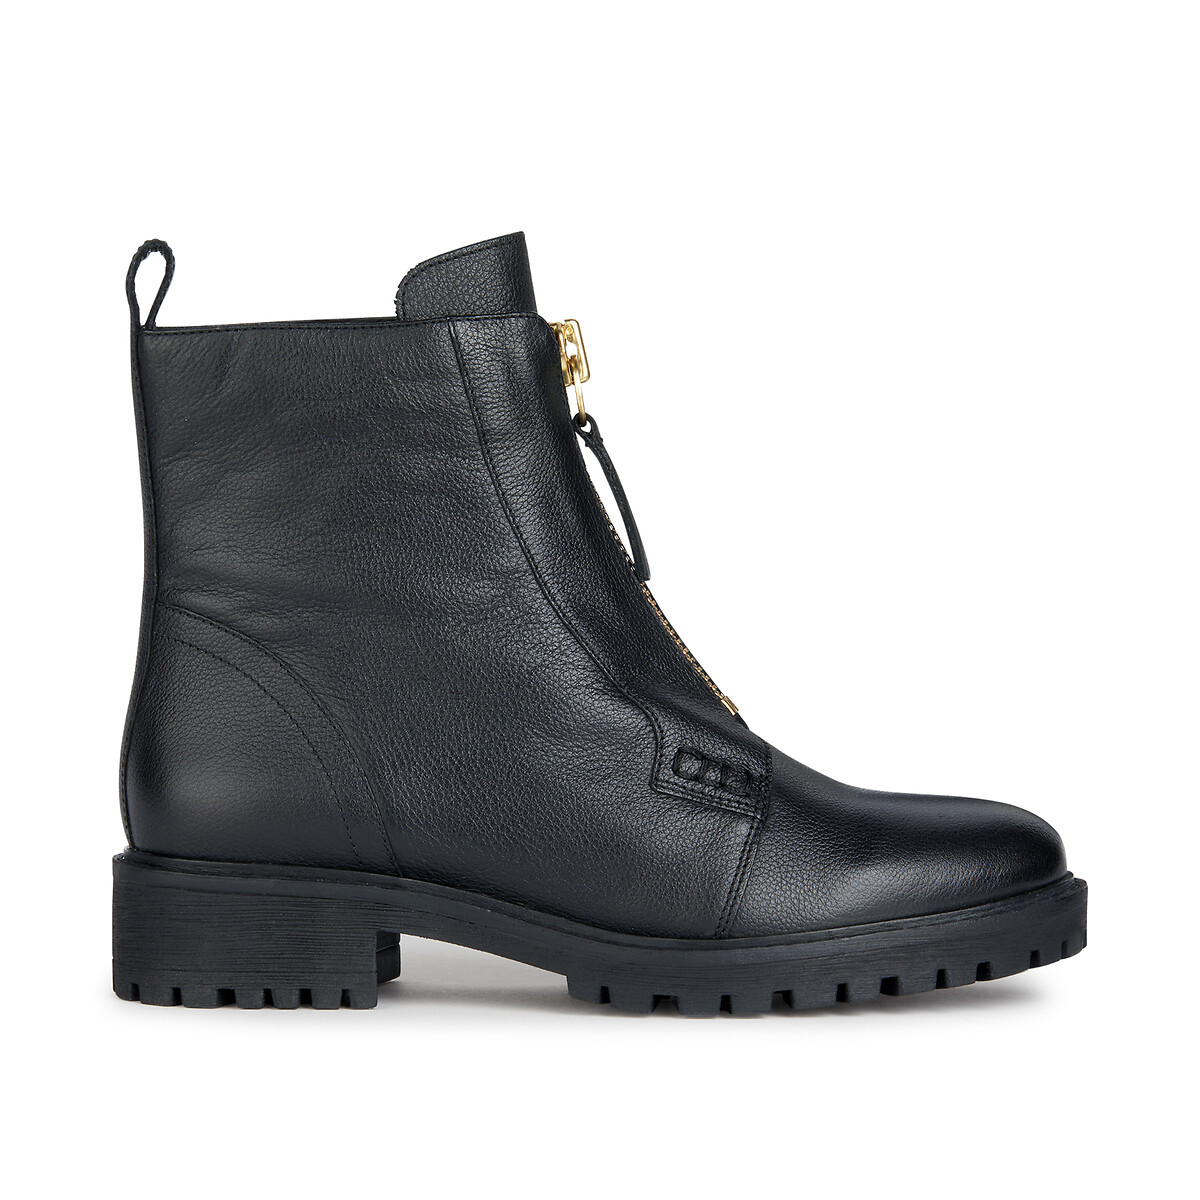 Hoara zipped ankle boots in breathable leather, black, Geox | La Redoute